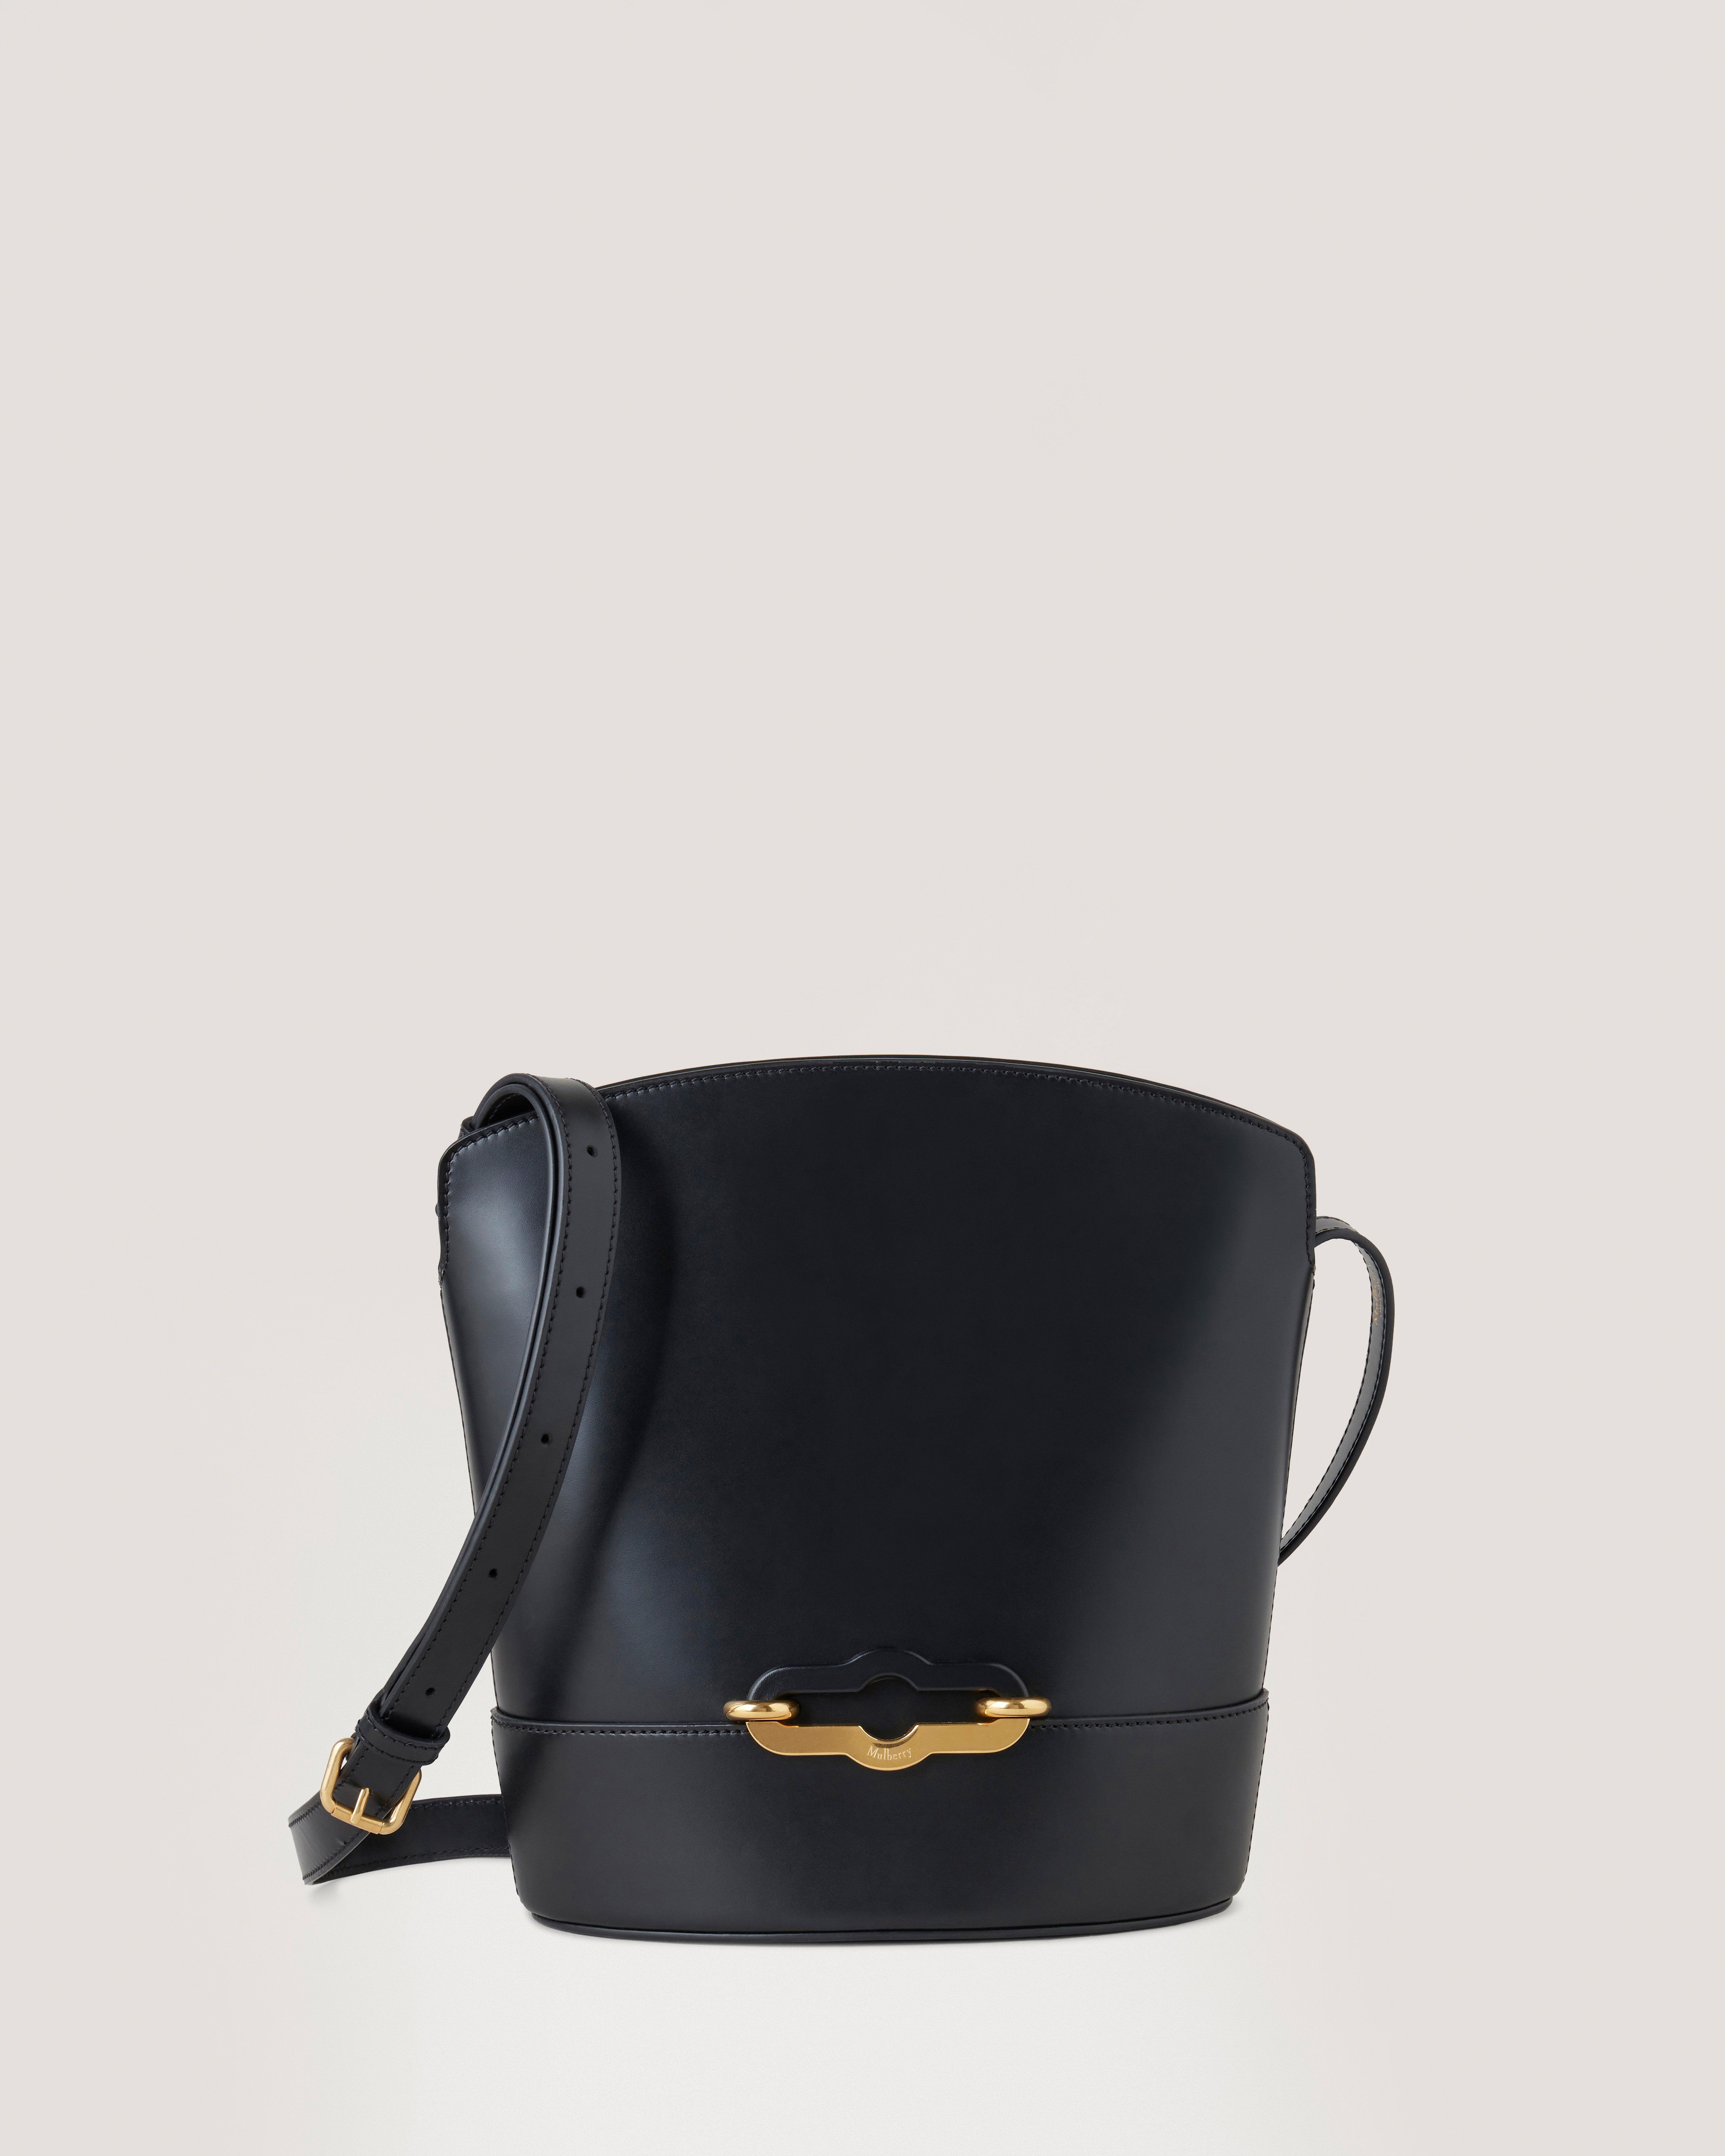 Mulberry Pimlico bucket bag in black and gold